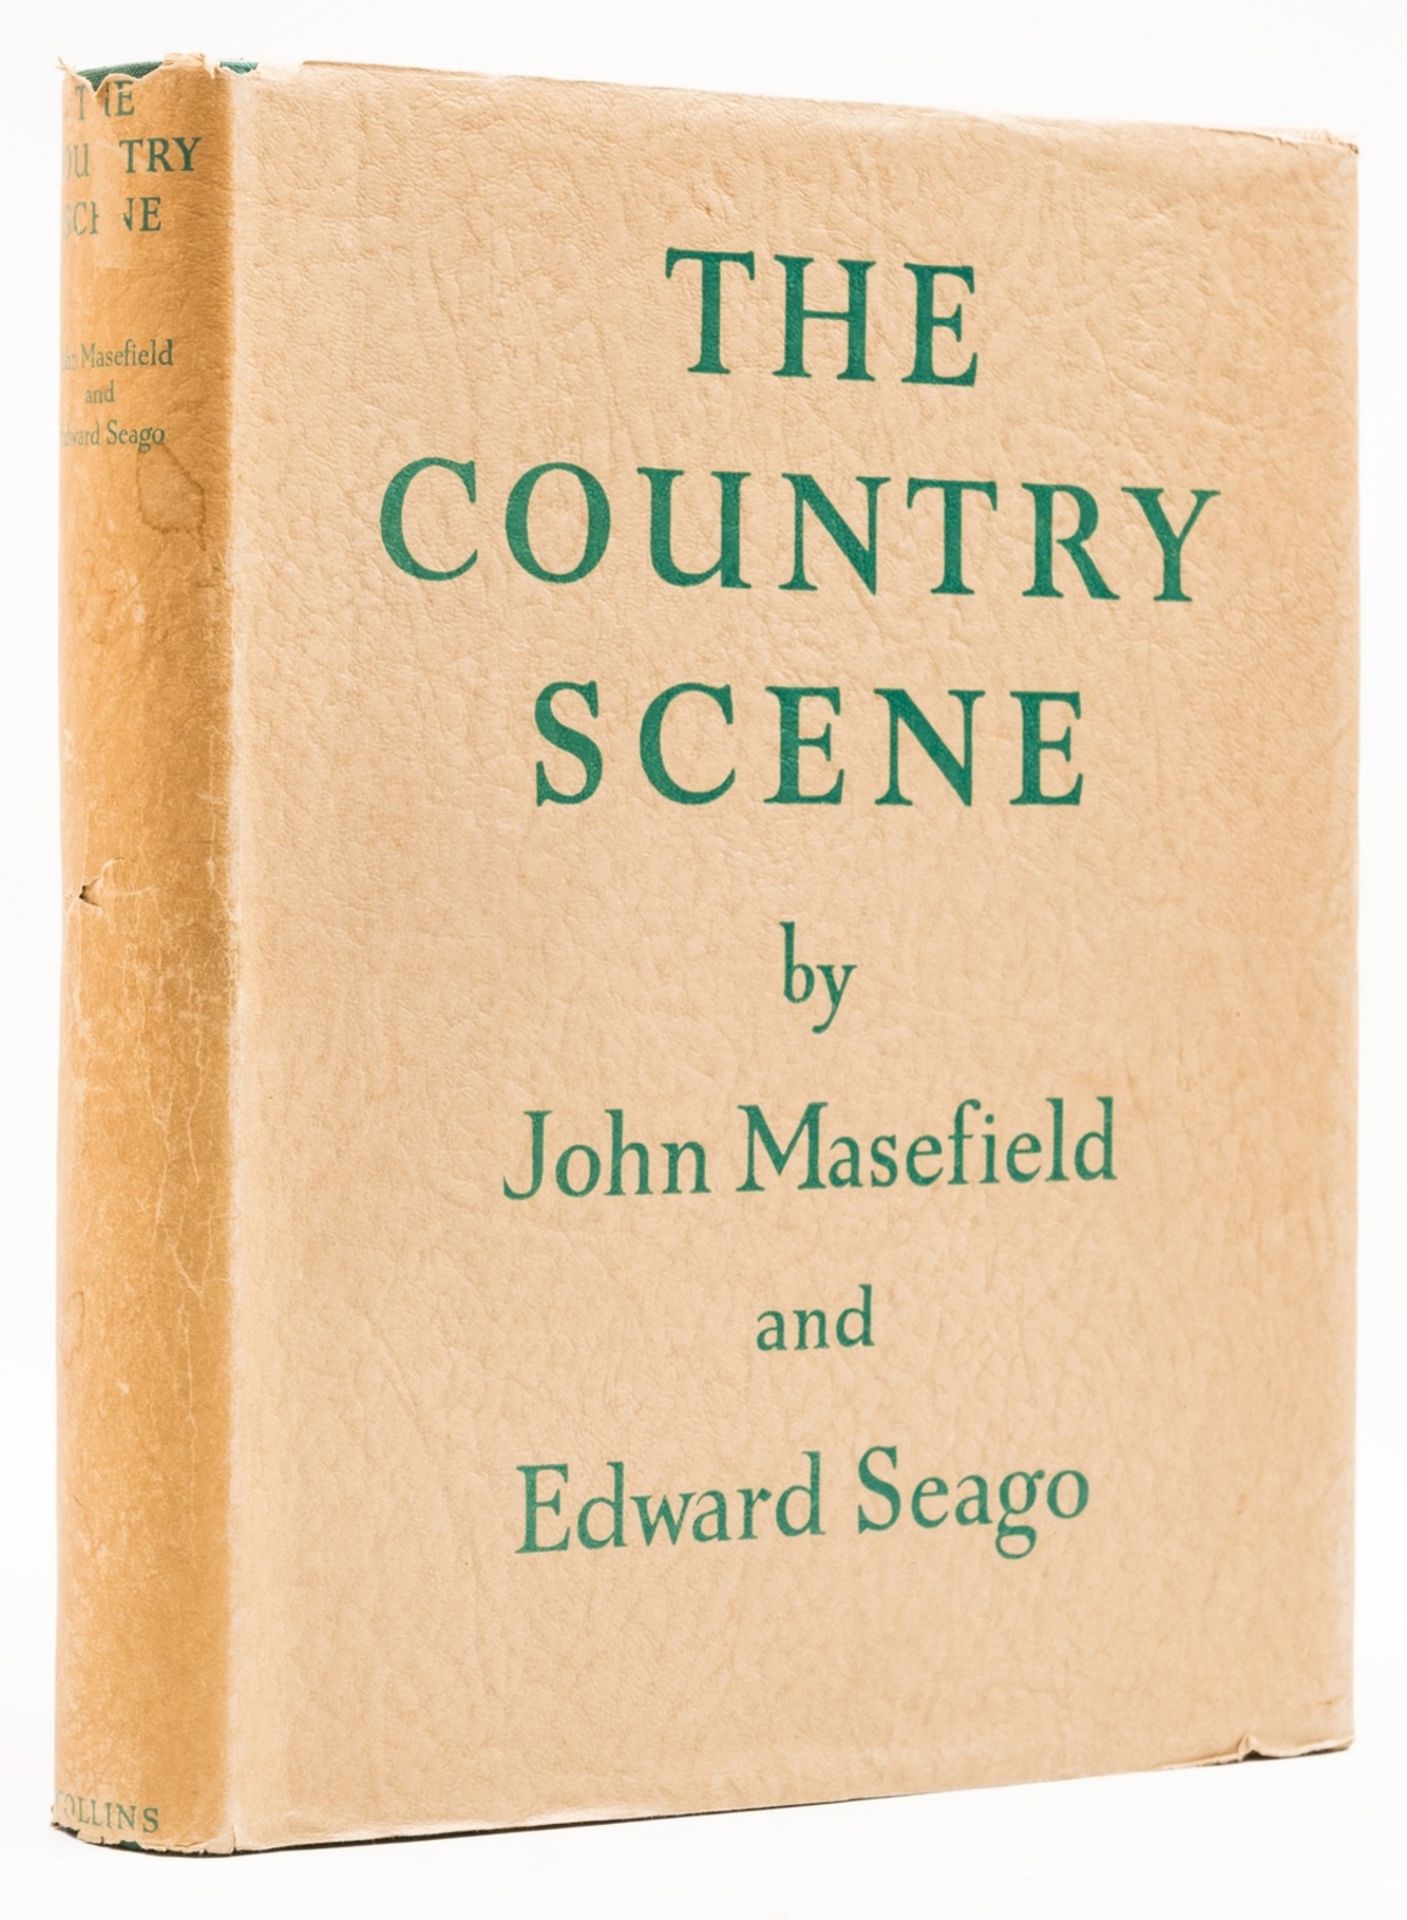 Masefield (John) The Country Scene, first edition, illustrations by Edward Seago, 1937.